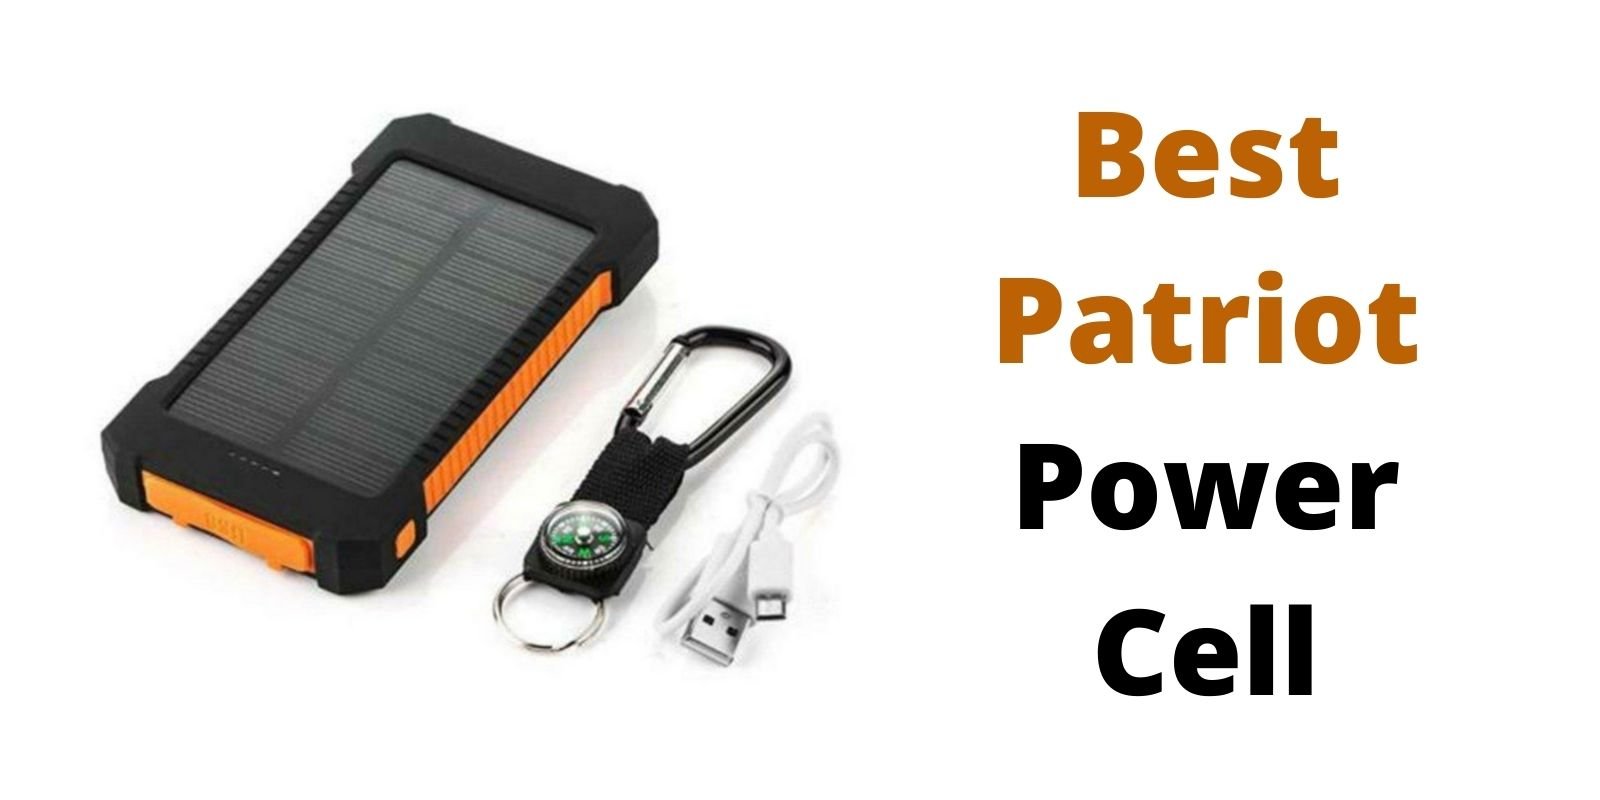 Best Patriot Power Cell [Reviews And Buying Guide] in 2021